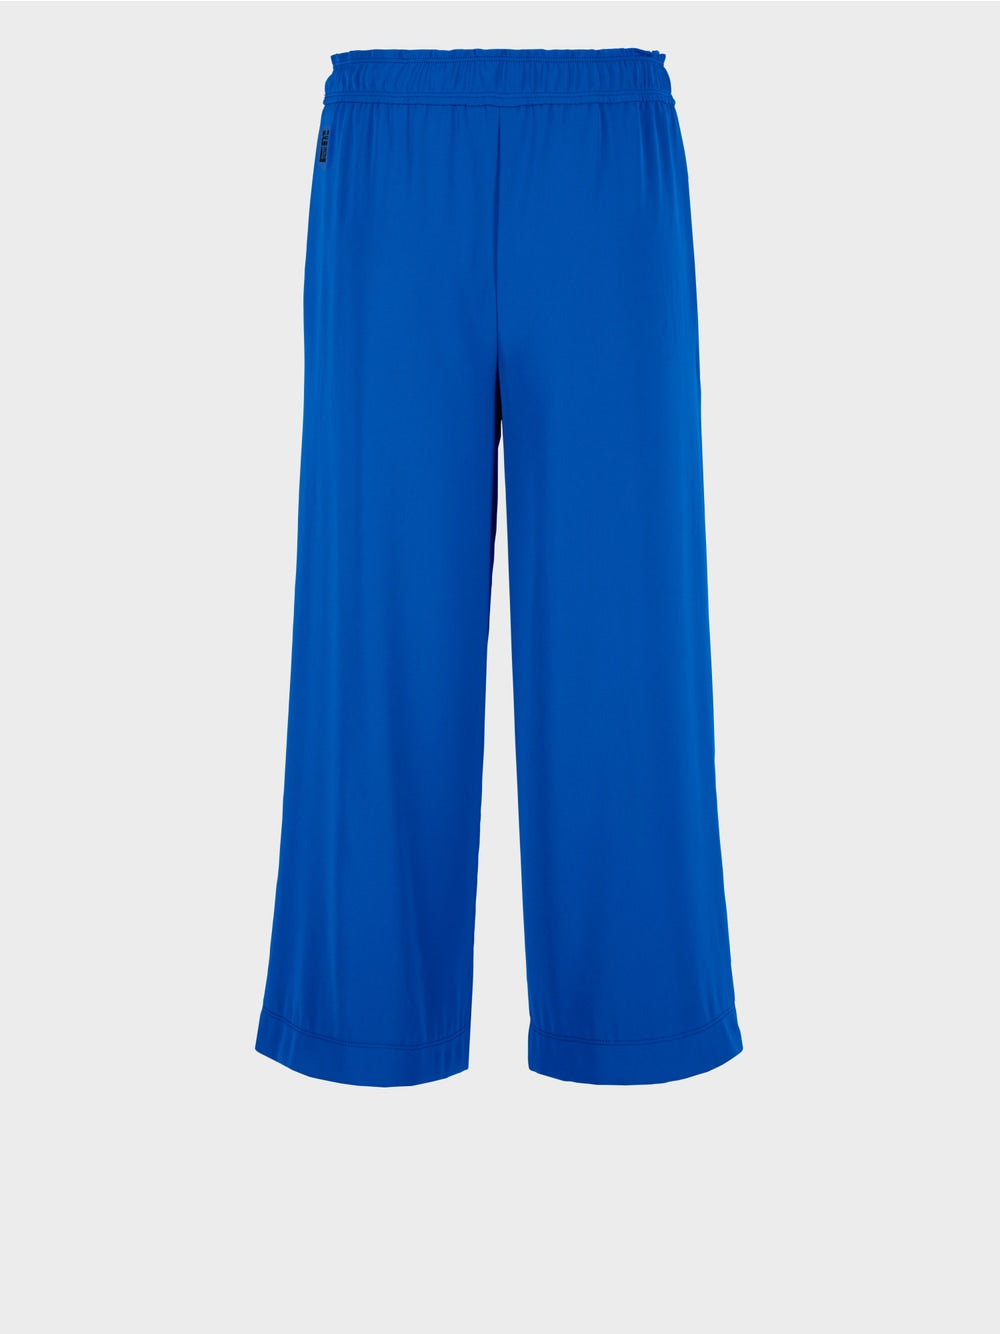 Marc Cain Bright Royal Blue WILLMAR pants in 3/4 length